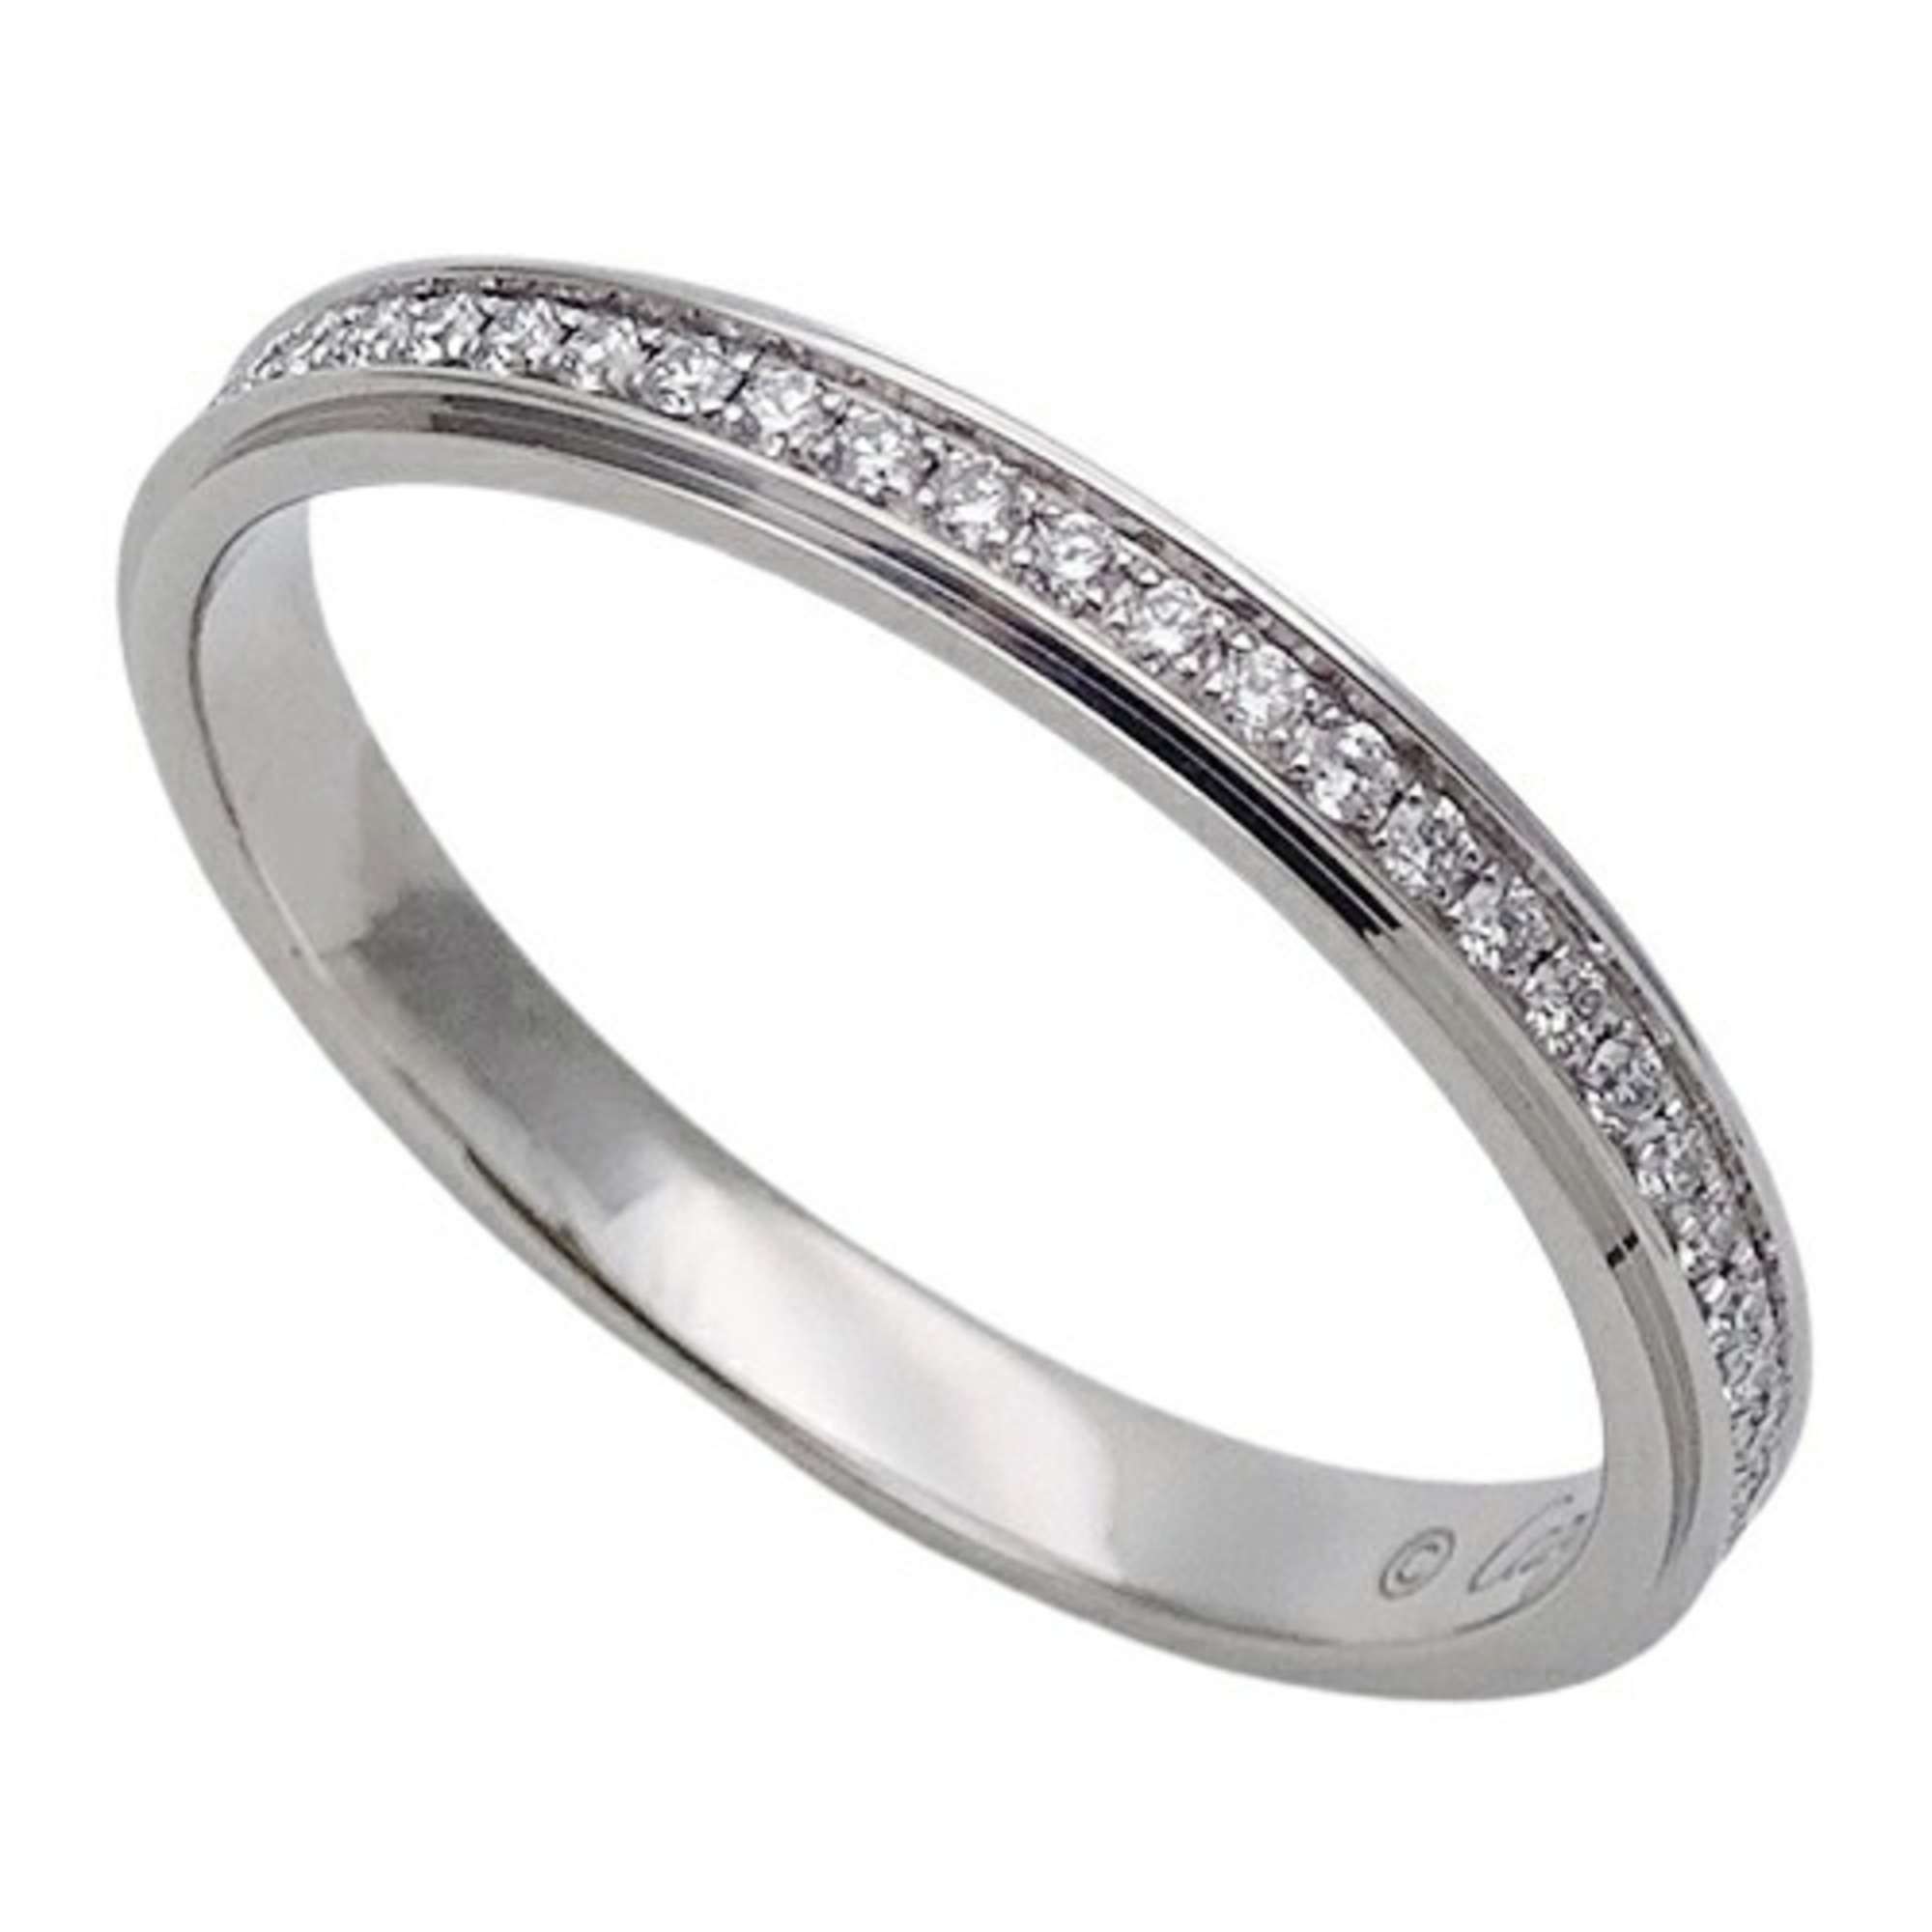 Cartier Ring for Women, PT950 Diamond Amour Wedding Platinum #48, Size 8, Polished